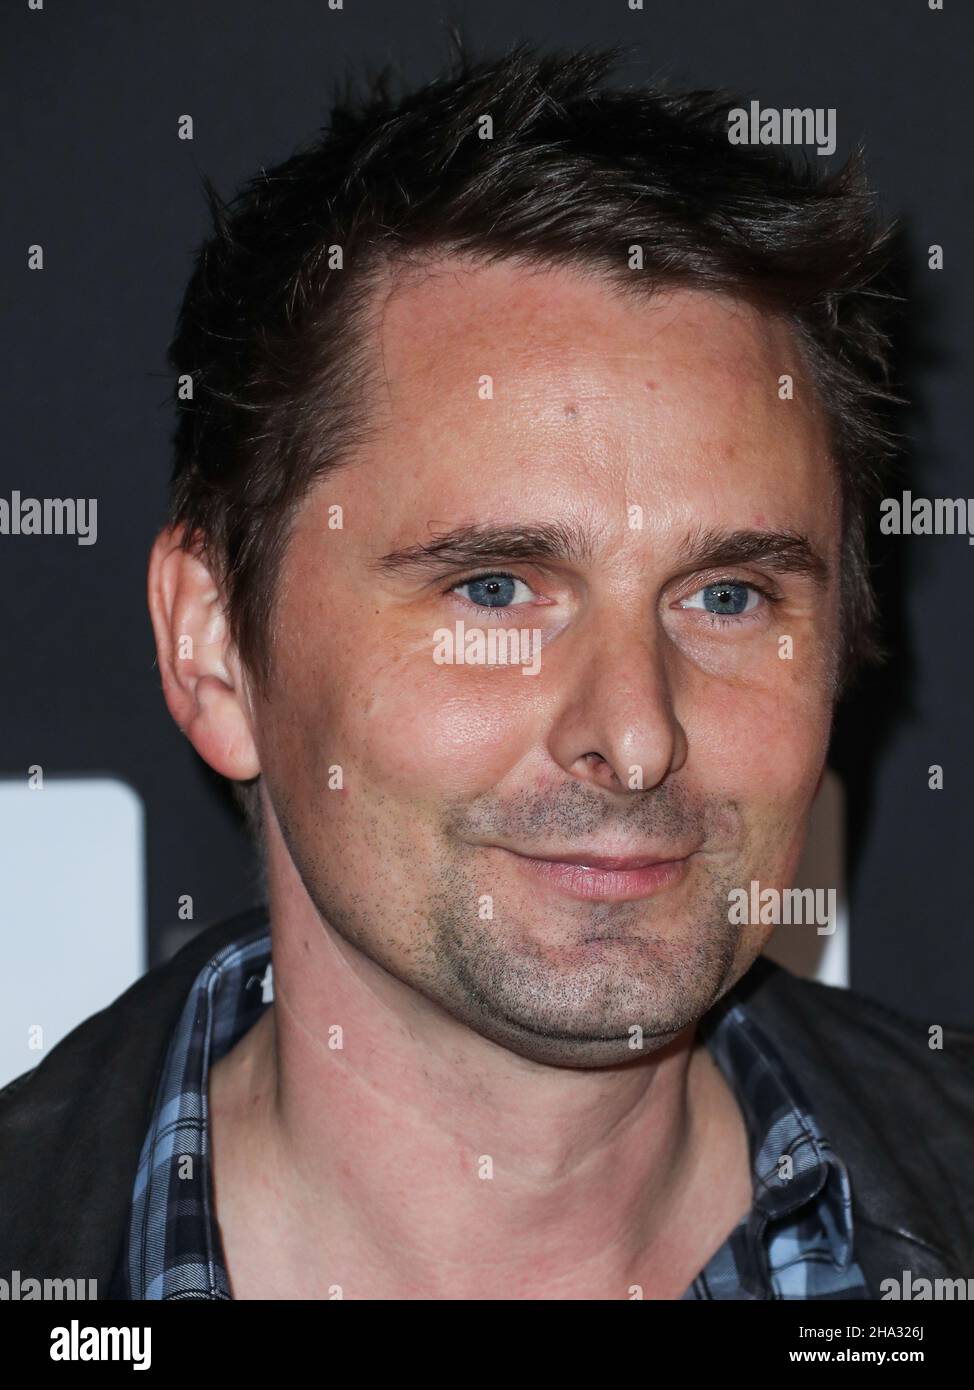 Hollywood, United States. 09th Dec, 2021. HOLLYWOOD, LOS ANGELES, CALIFORNIA, USA - DECEMBER 09: Singer Matt Bellamy of Muse arrives at the Flip Grand Launch Event Hosted by Grammy-Nominated Artist Halsey with Performances by Scout Willis, BIA, and Kehlani held at Avalon Hollywood on December 9, 2021 in Hollywood, Los Angeles, California, United States. (Photo by Xavier Collin/Image Press Agency/Sipa USA) Credit: Sipa USA/Alamy Live News Stock Photo